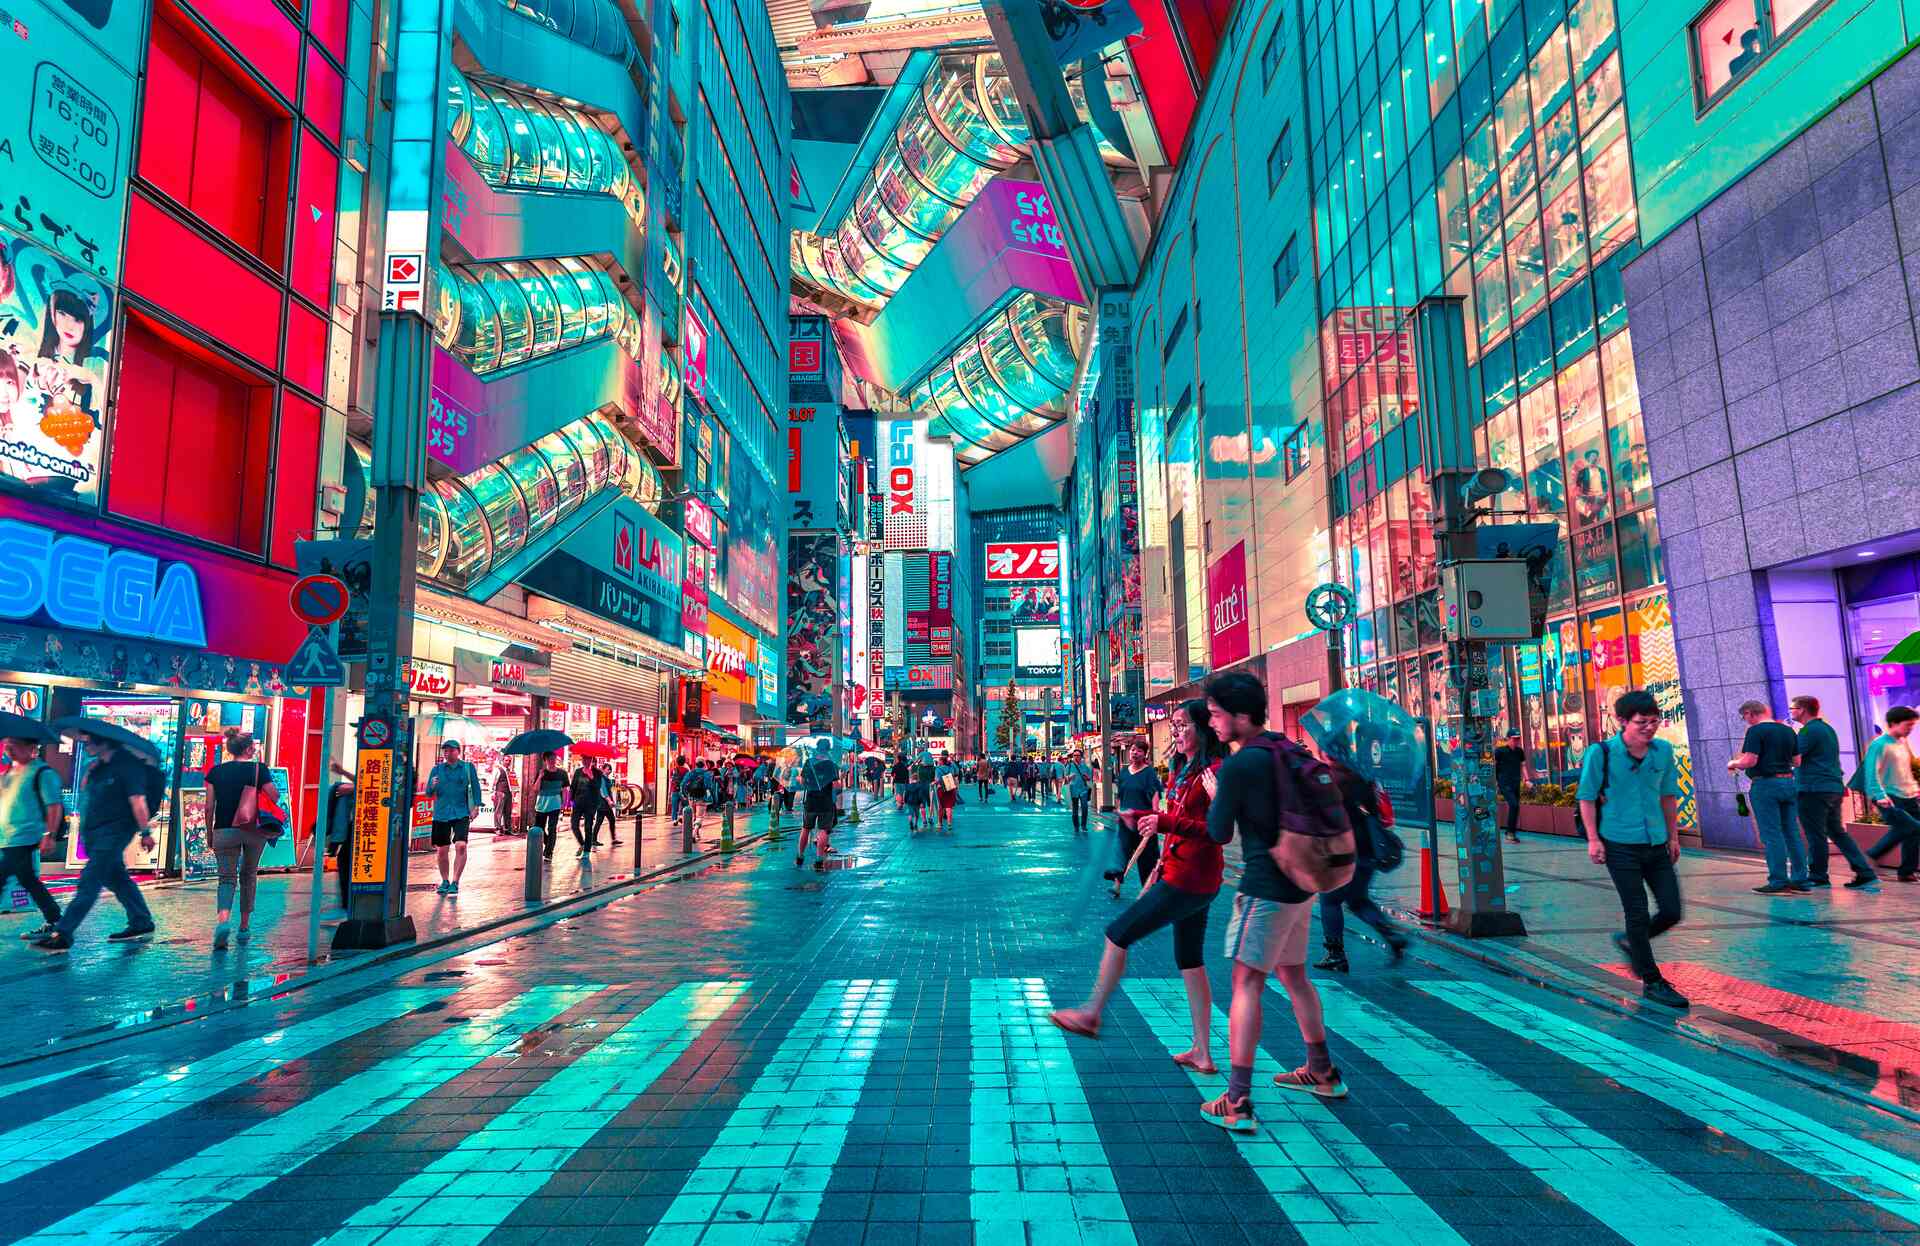 View of a street in Japan